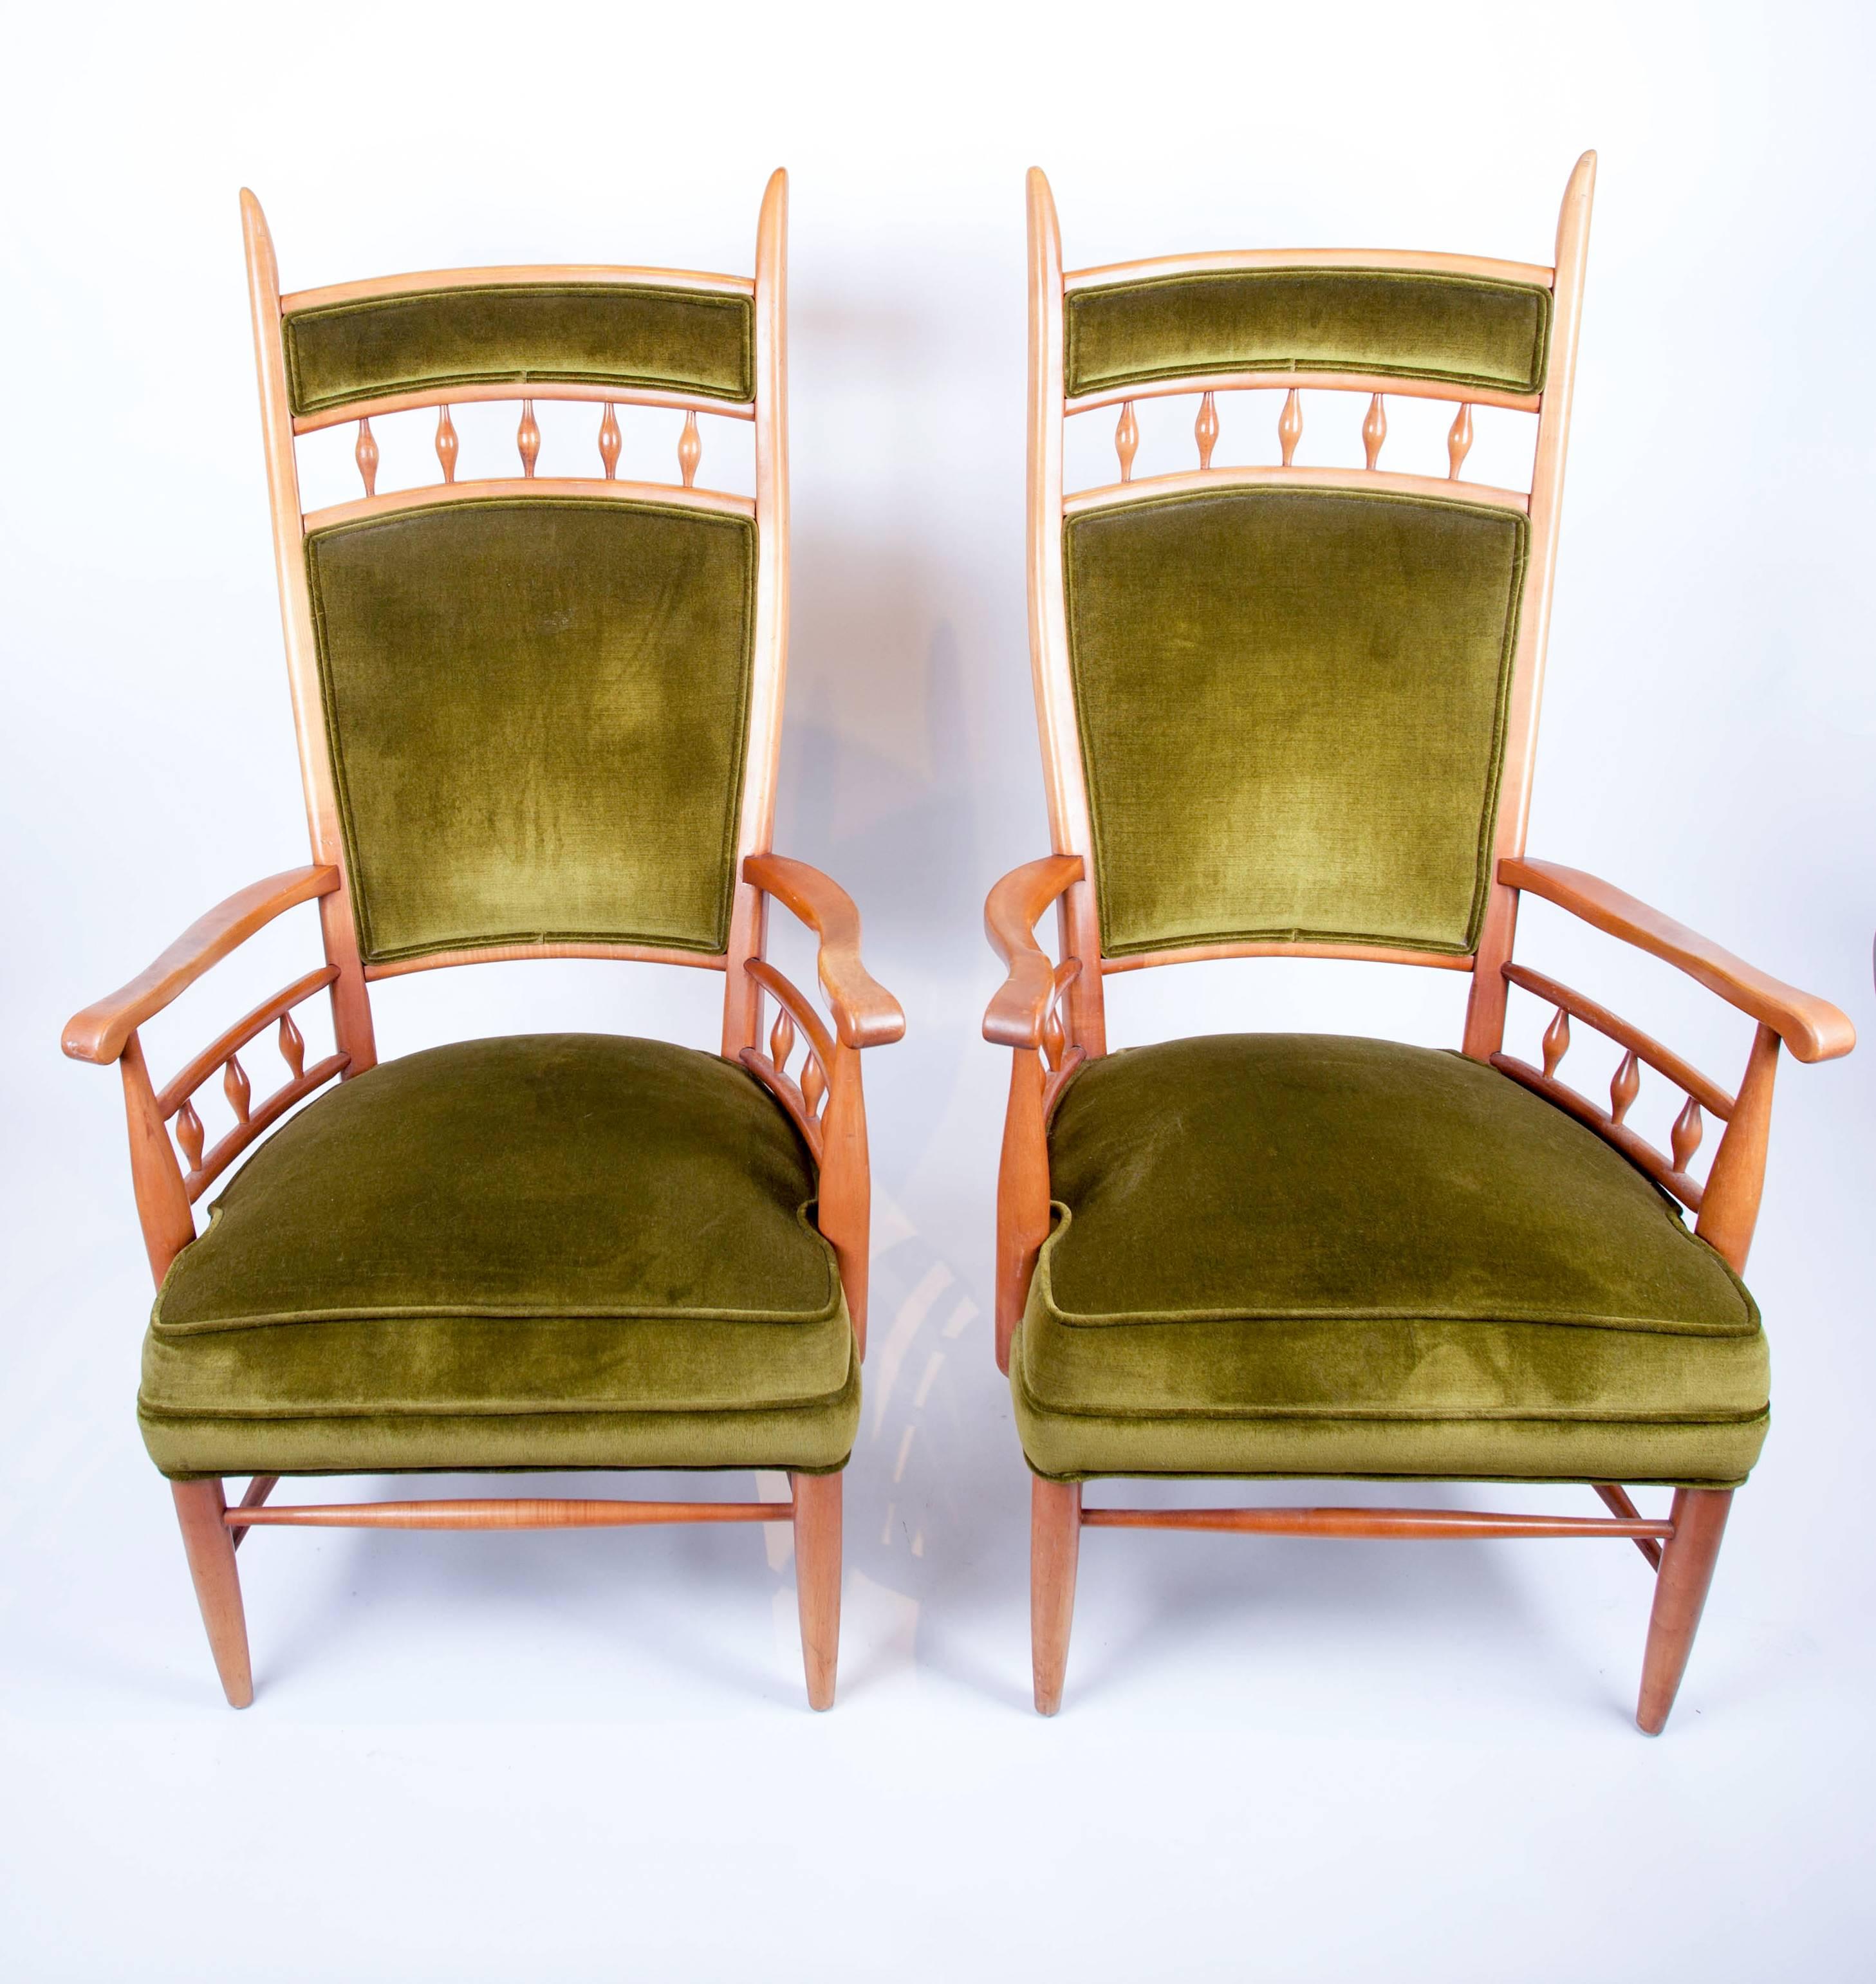 Fabric Pair of Tall Fruitwood Framed Armchairs by Maxwell Royal. C. 1950's. For Sale